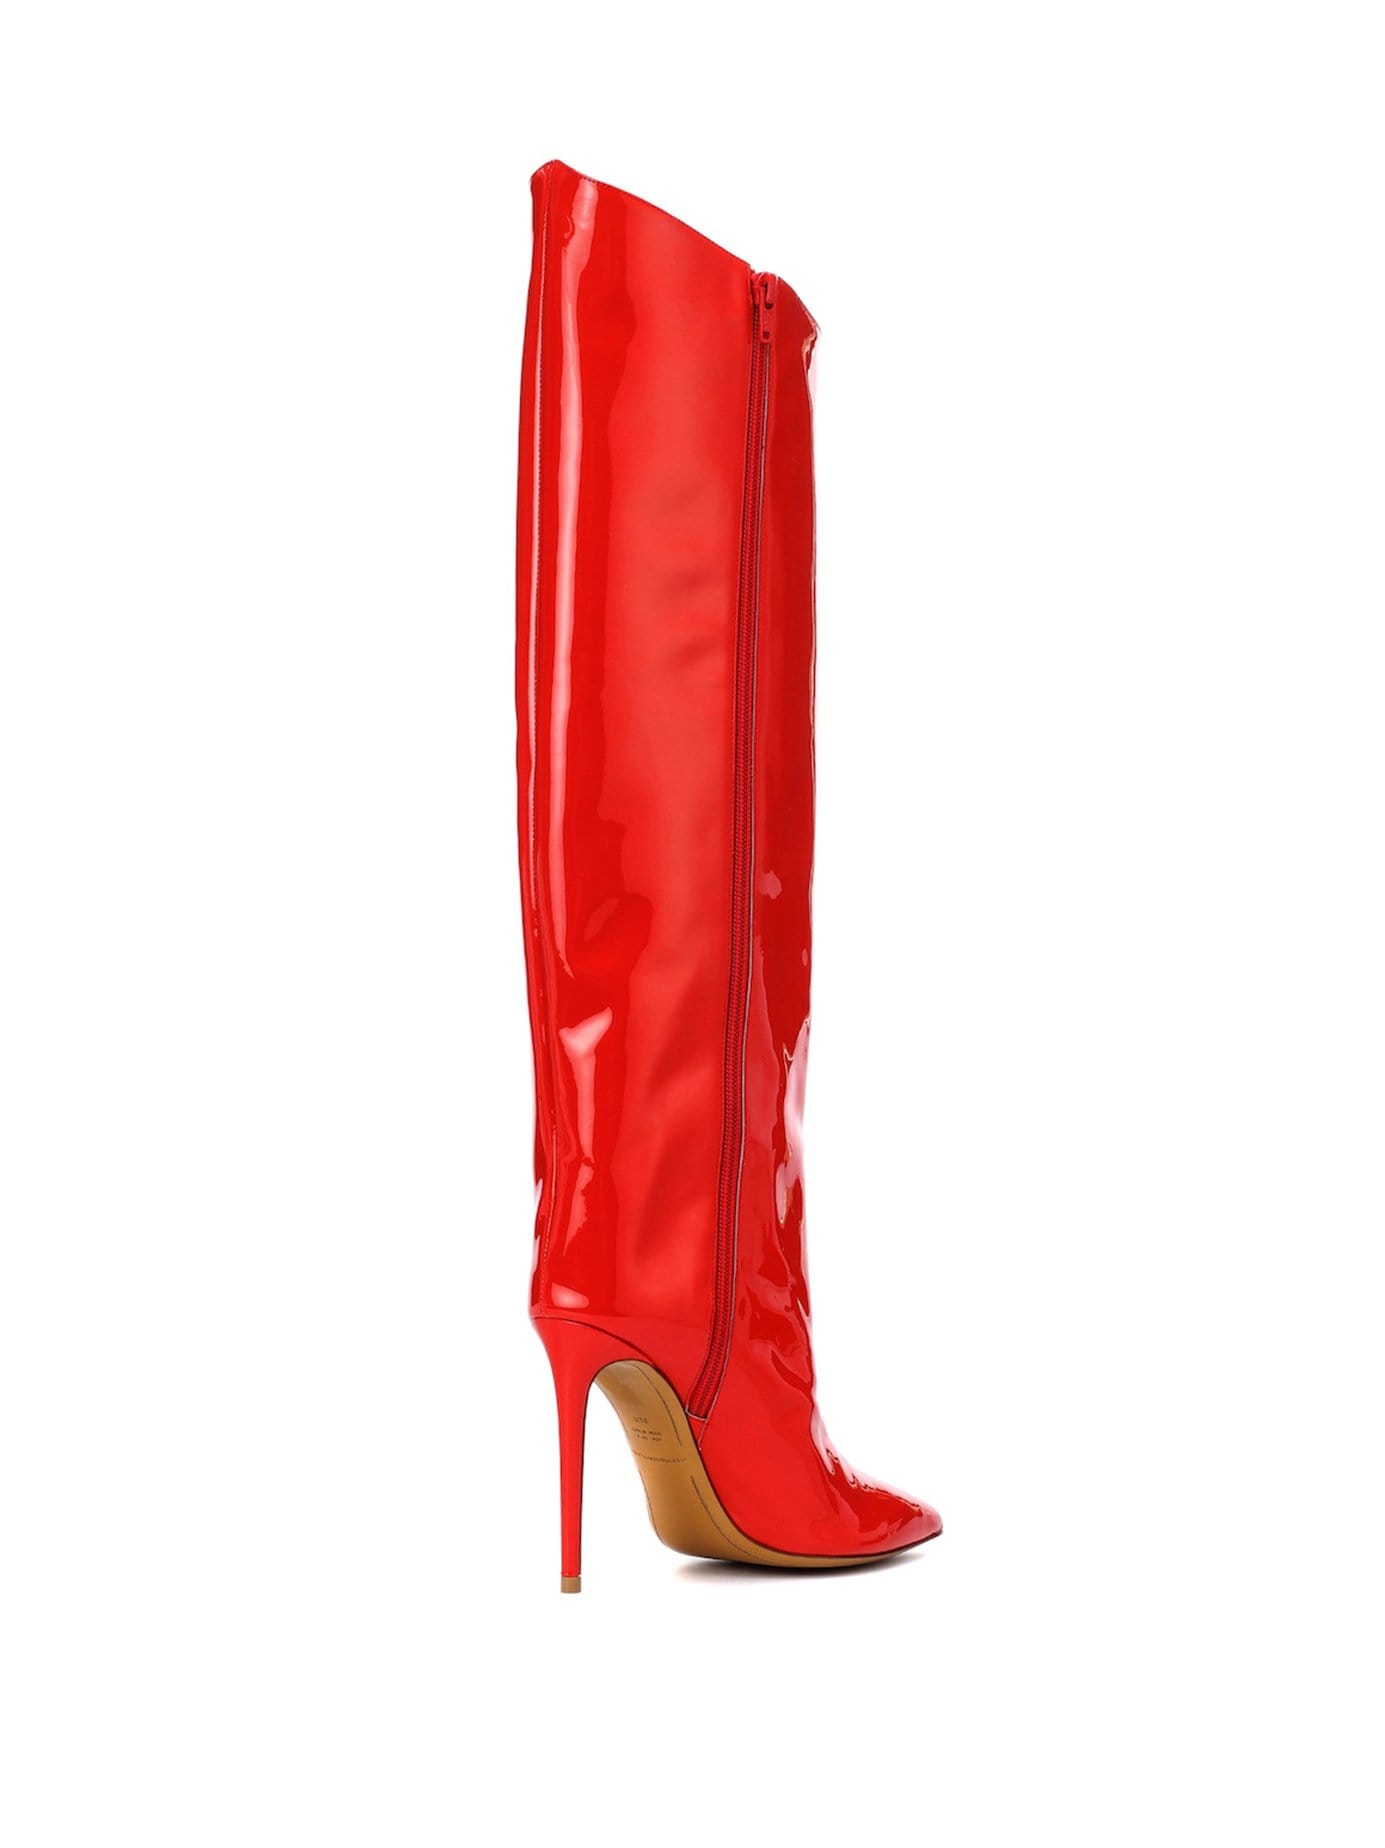 Patent Leather Boots in Red